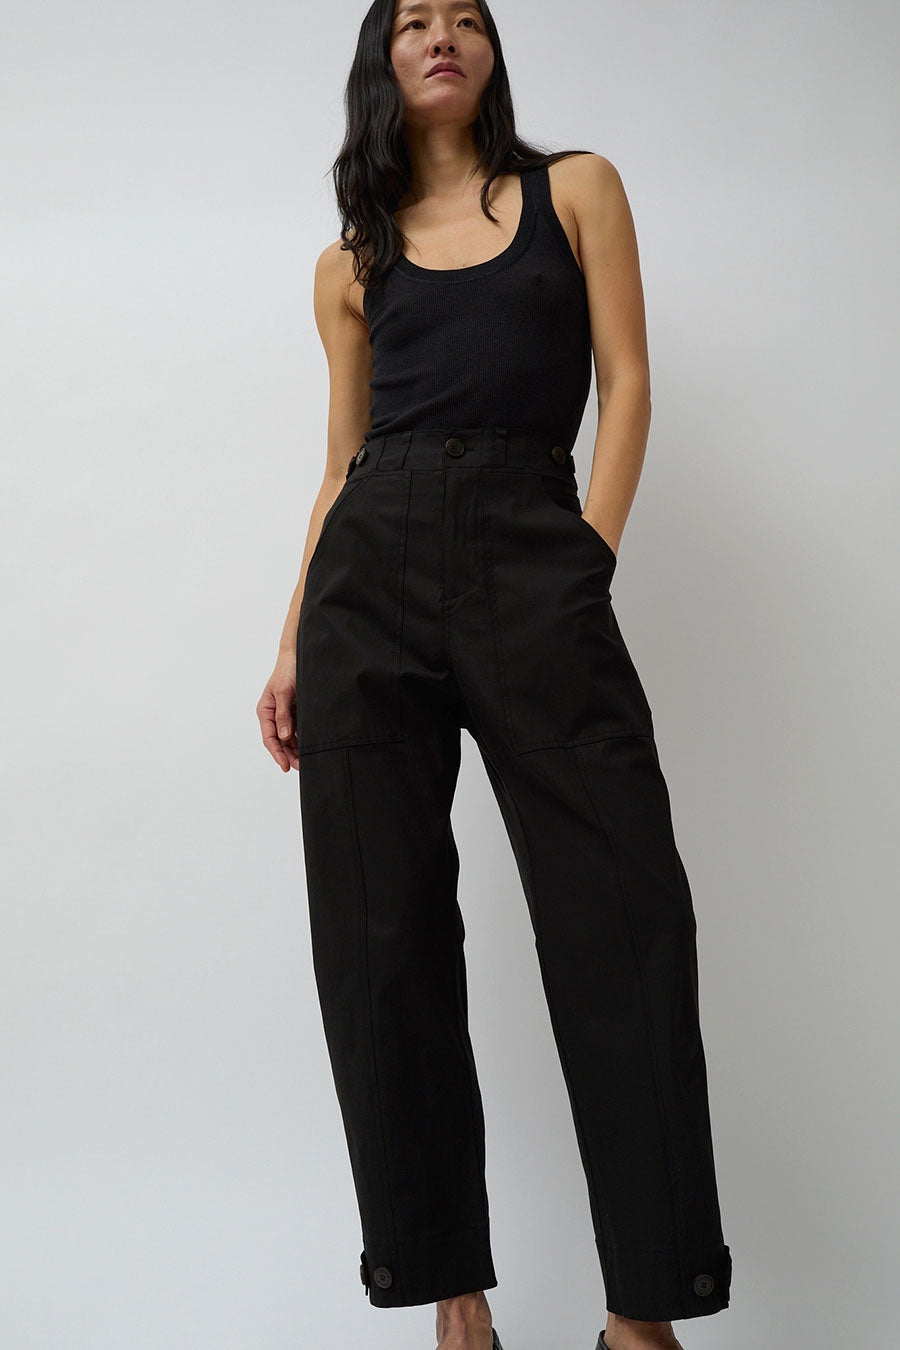 Mijeong Park Cropped Workwear Pants in Black